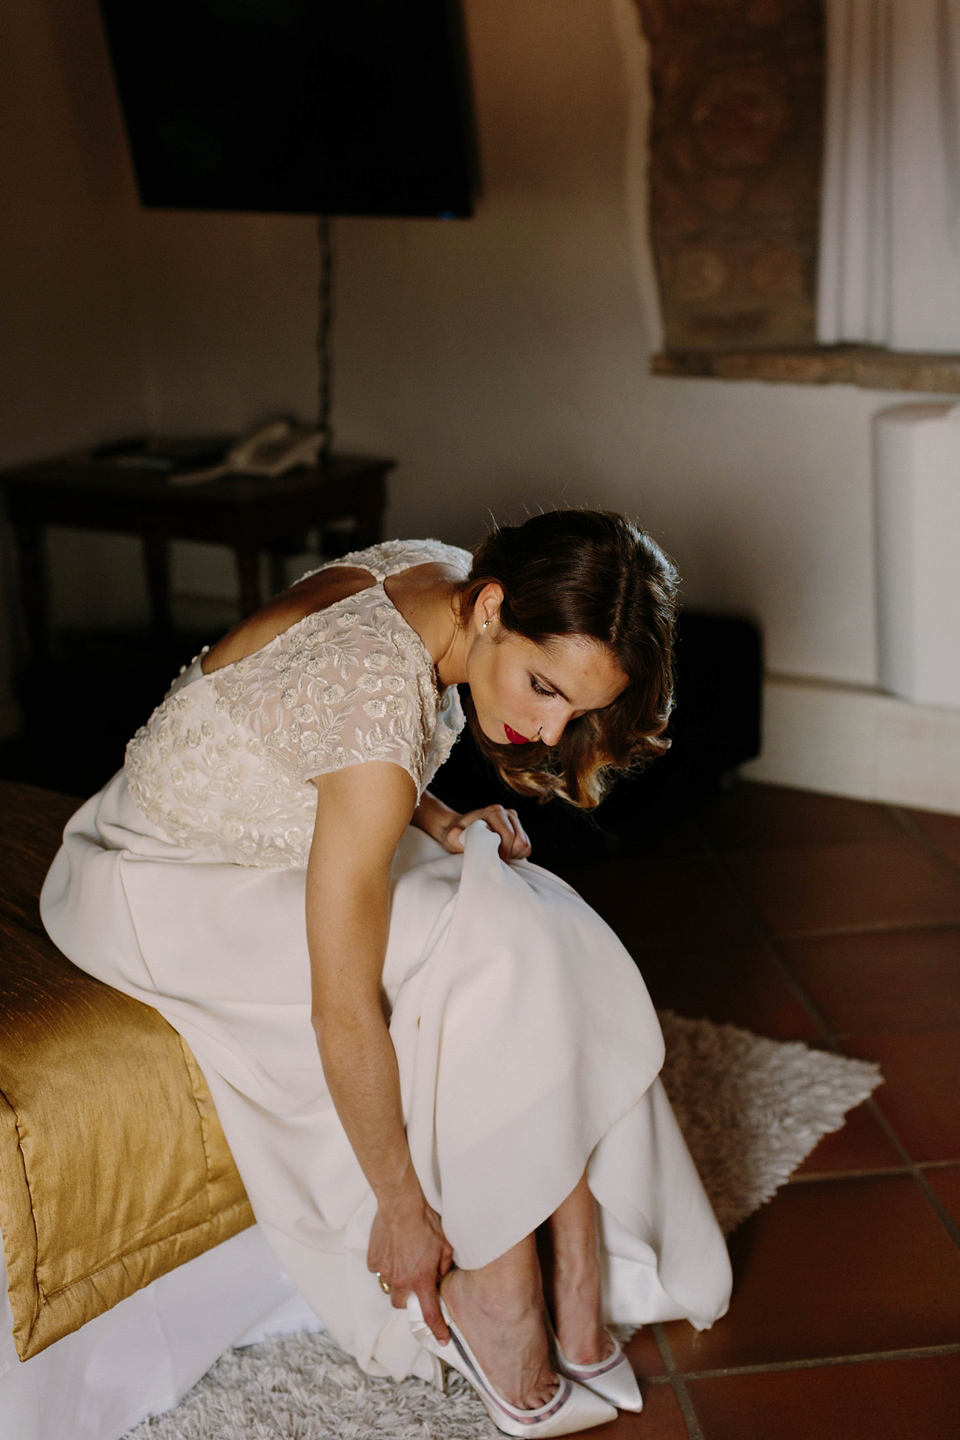 Otaduy Glamour and Spanish Elopement Style. Styling and concept by Bodas Entre Tules, photogrpahy by Levi Tijerini.